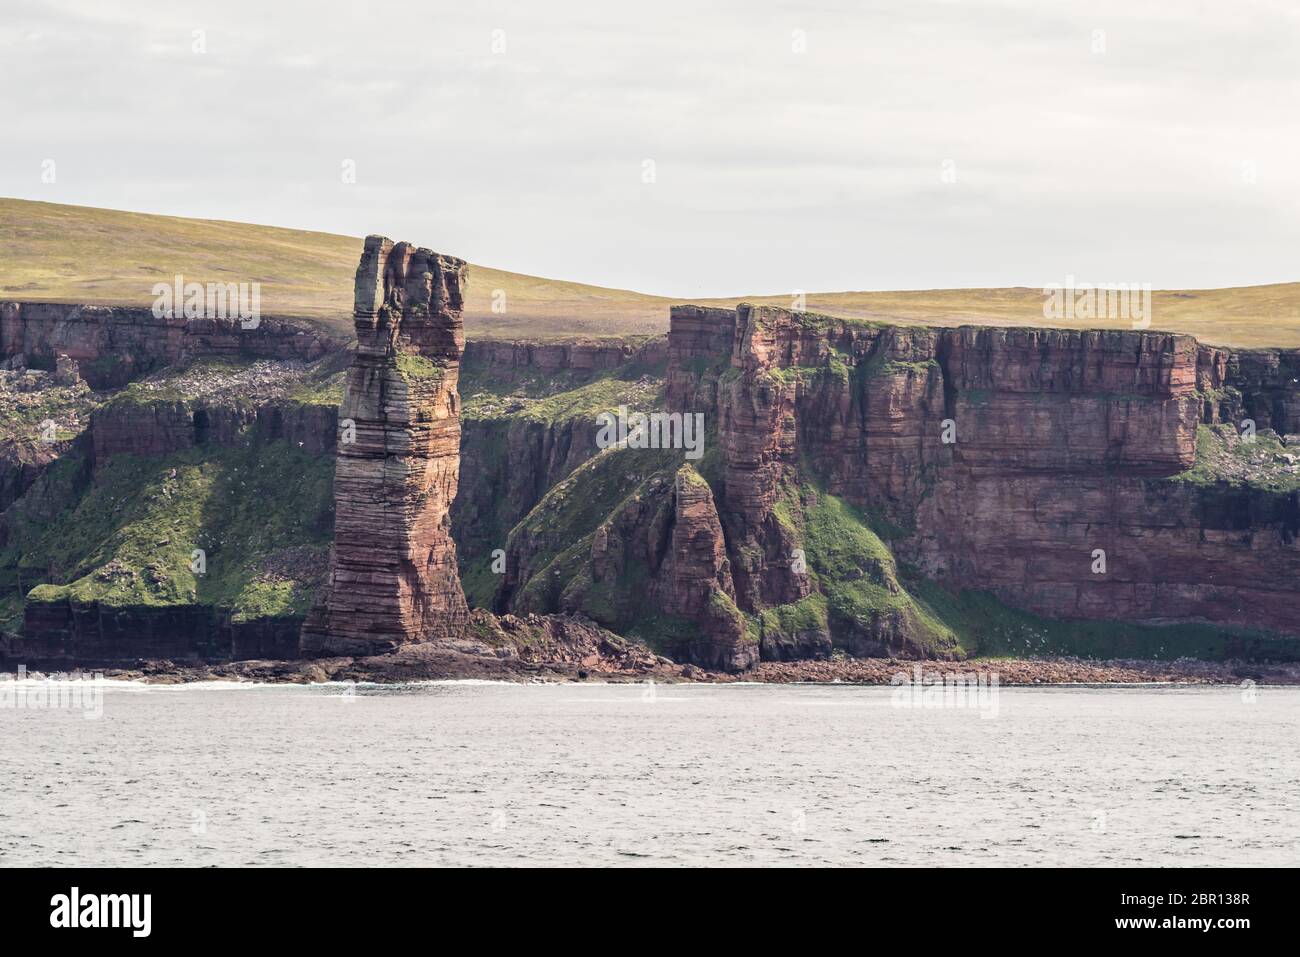 ocean view of the Old Man of Hoy, a tall sandstone stack at the coast between Stromness and Scrabster at Orknay in Scotland, Uk. Famous climbing place Stock Photo